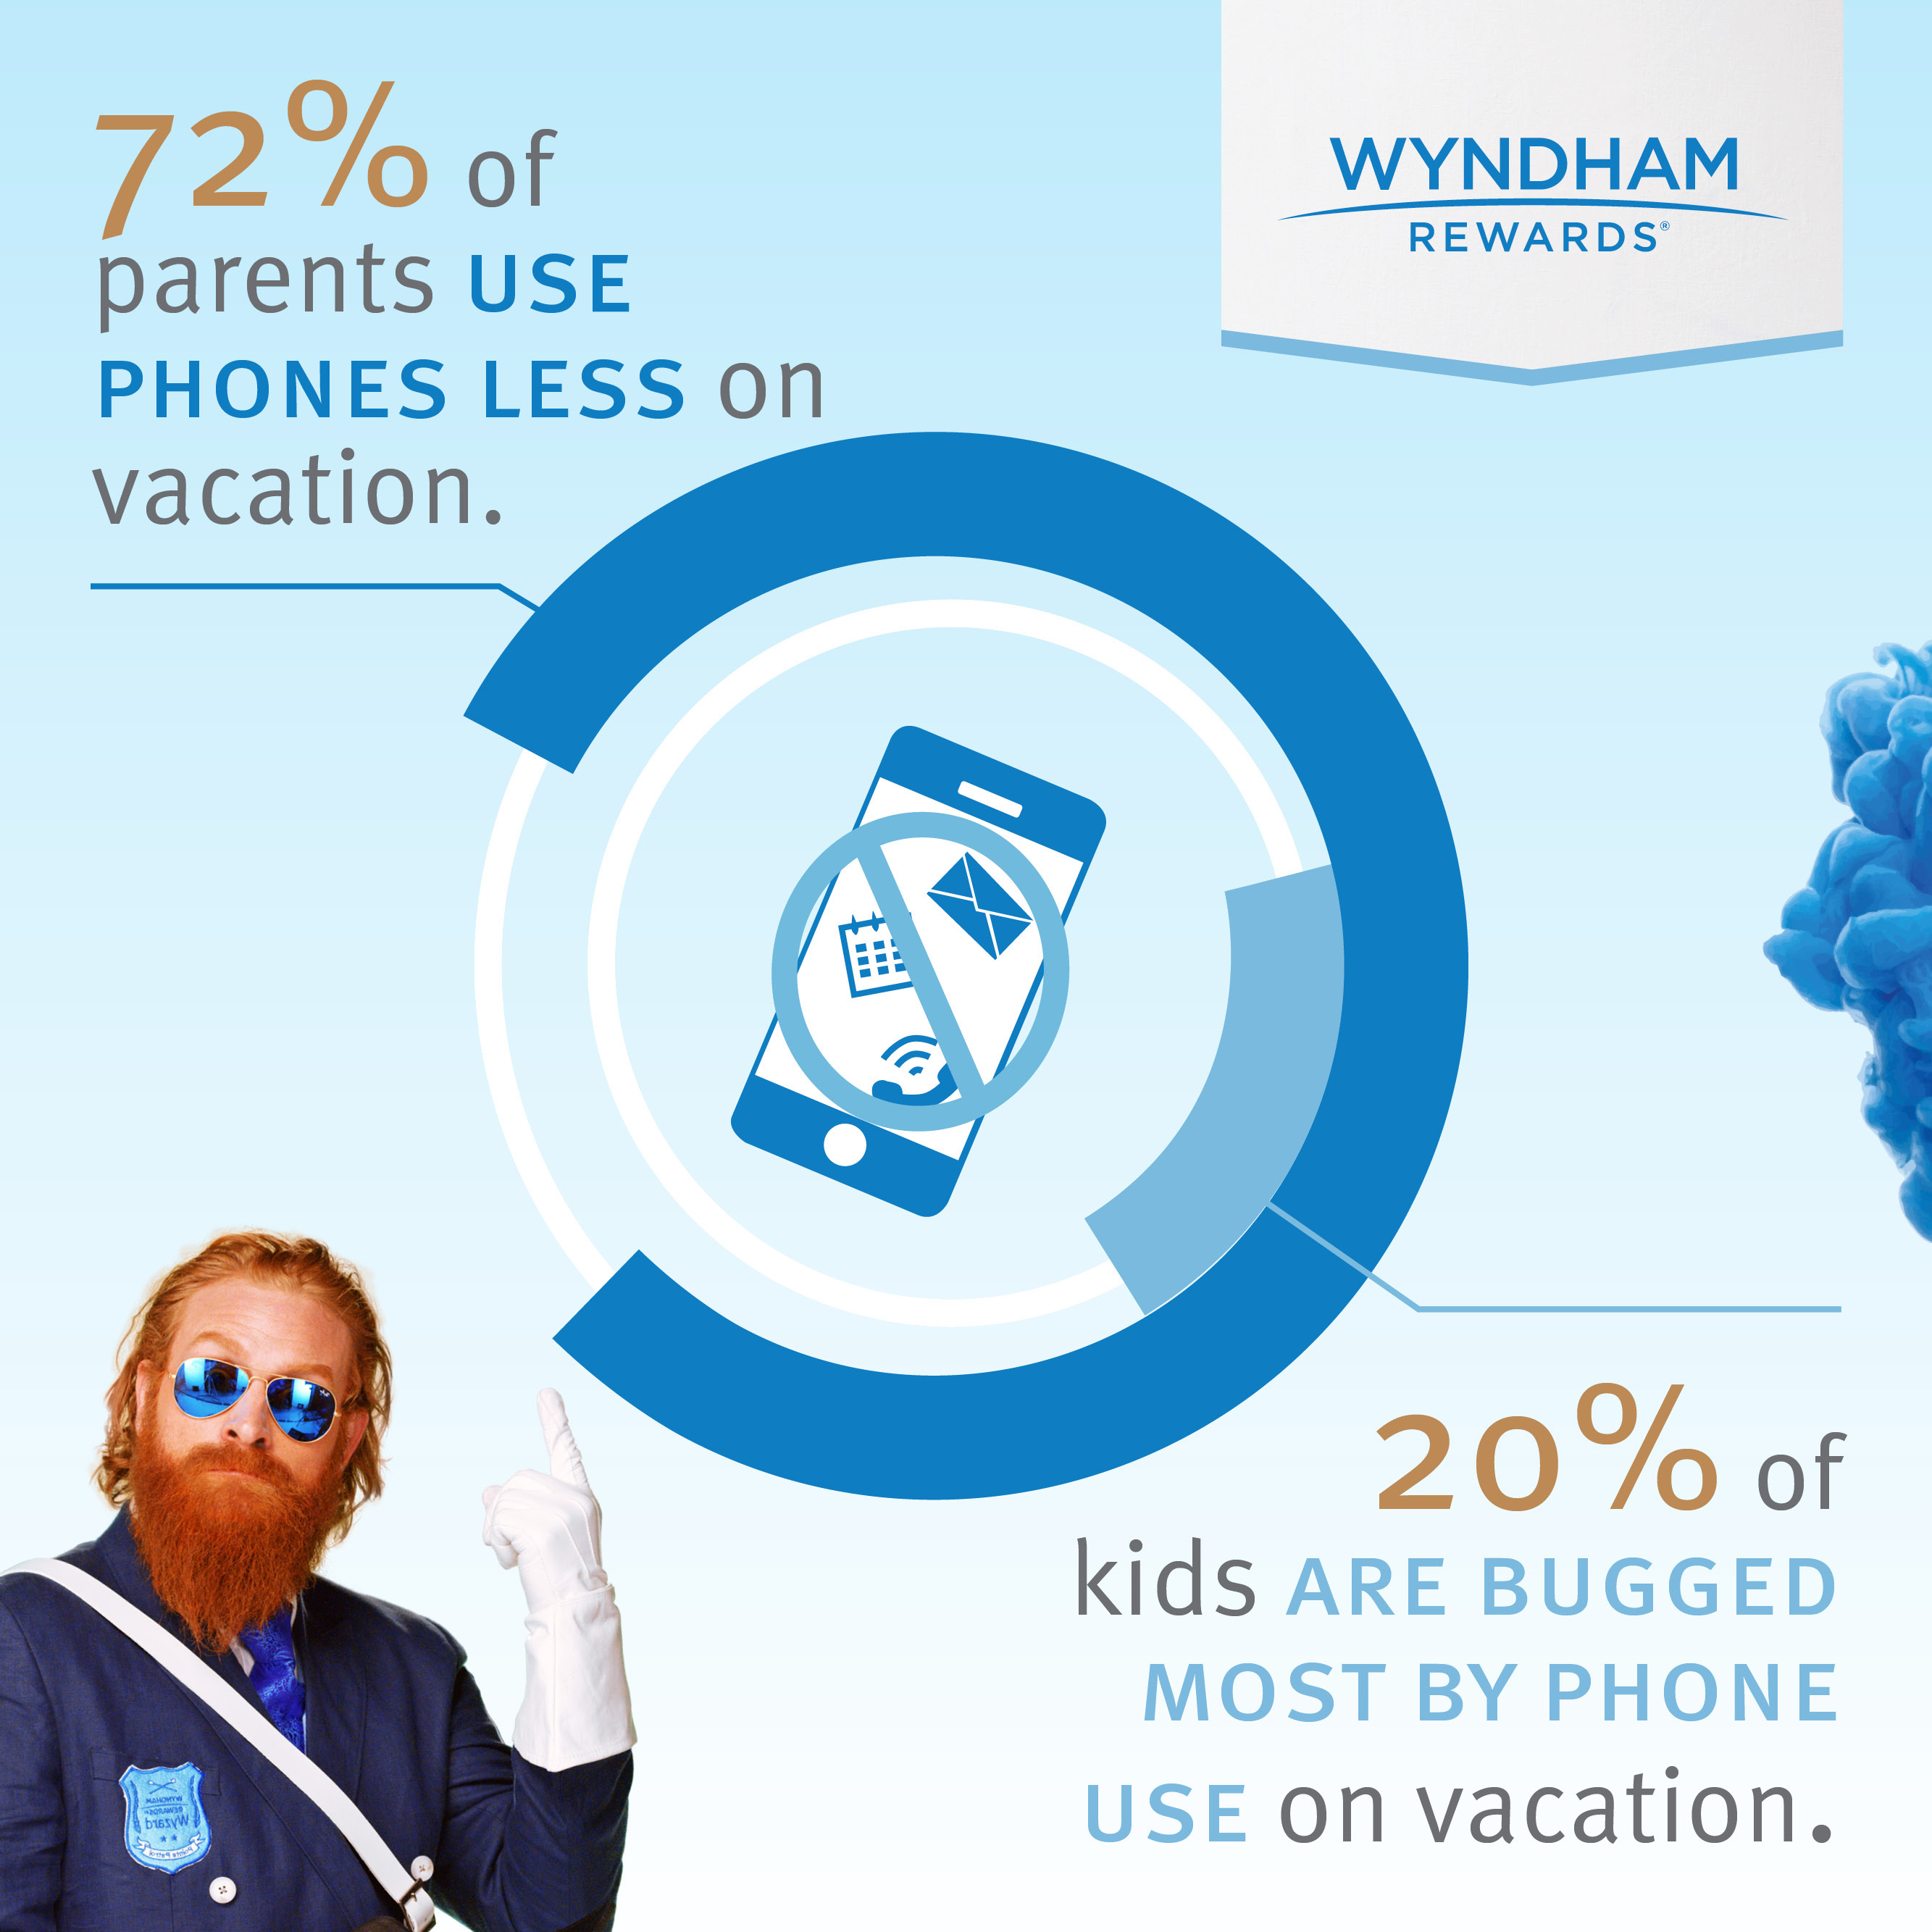 A new national survey by Wyndham Rewards found that 20% of kids say that the one thing their parents do that bothers them the most while on vacation is use their cell-phone.